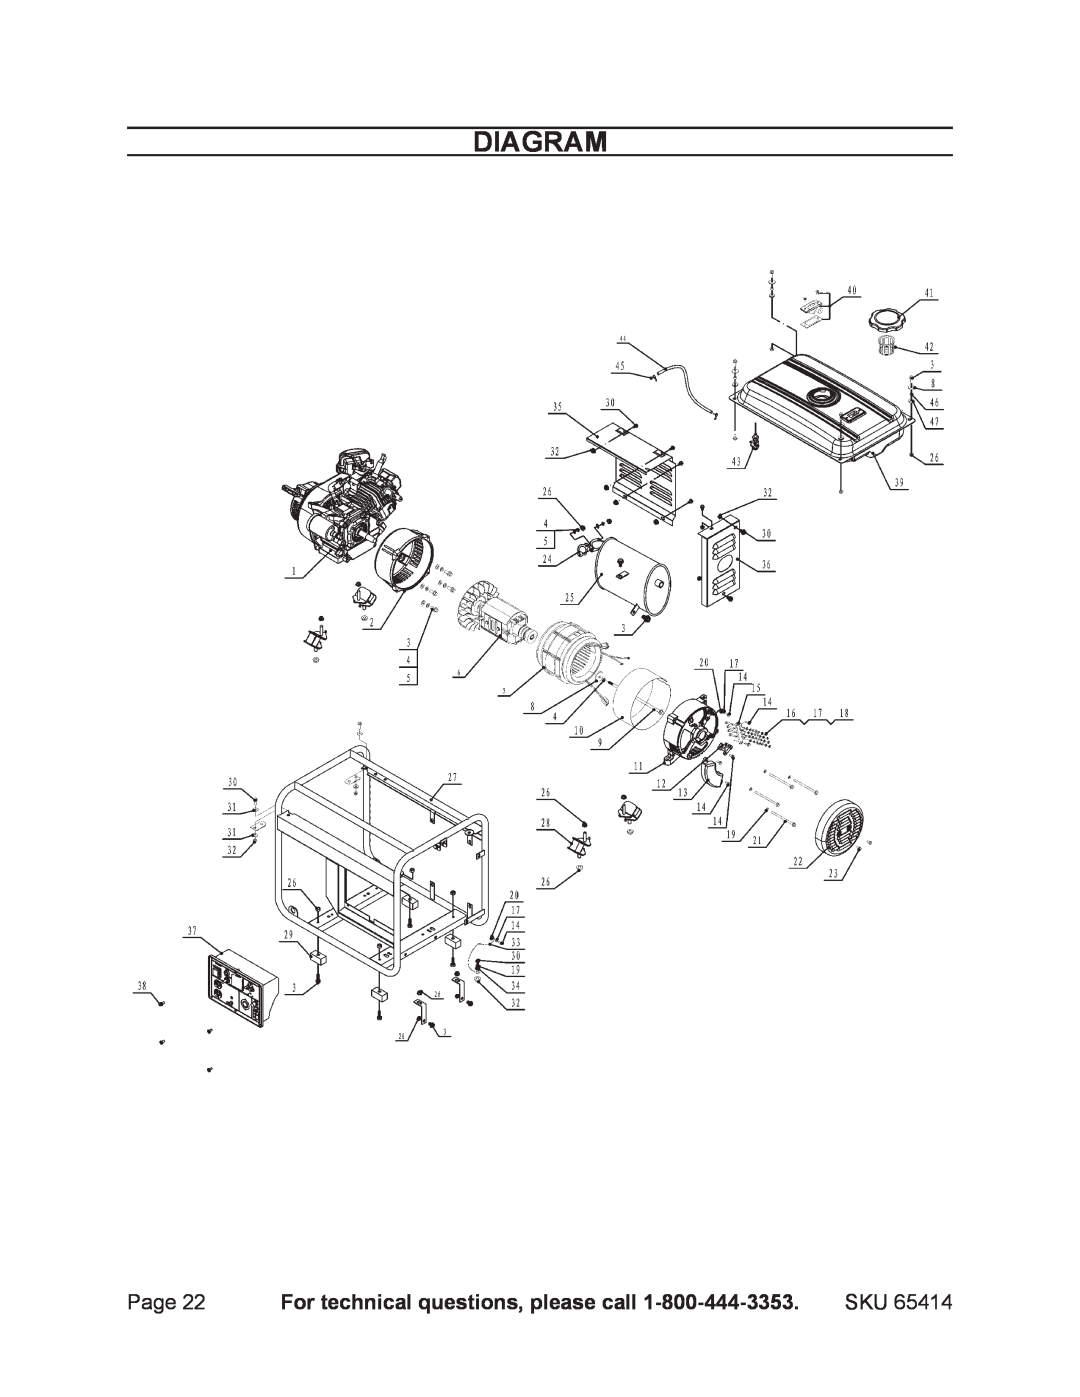 Chicago Electric 65414 manual Diagram, For technical questions, please call 